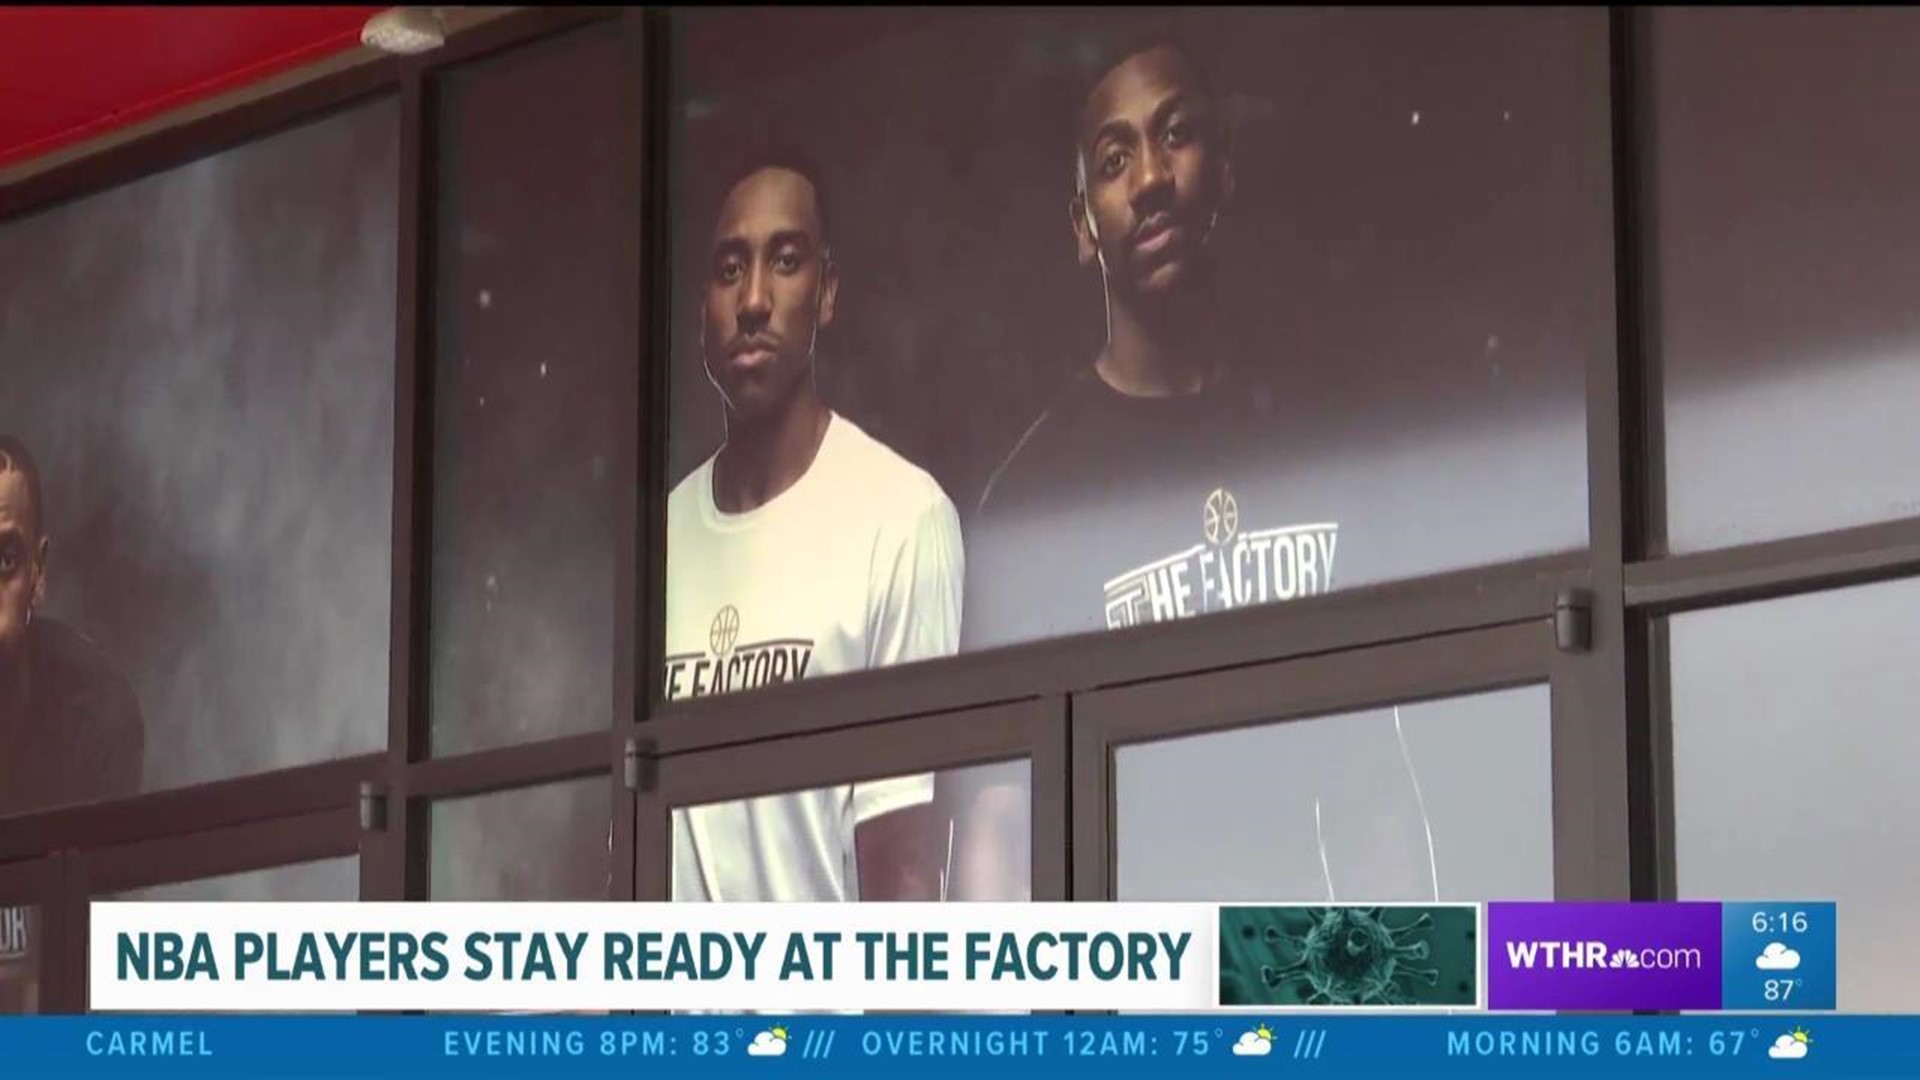 NBA players stay ready at The Factory